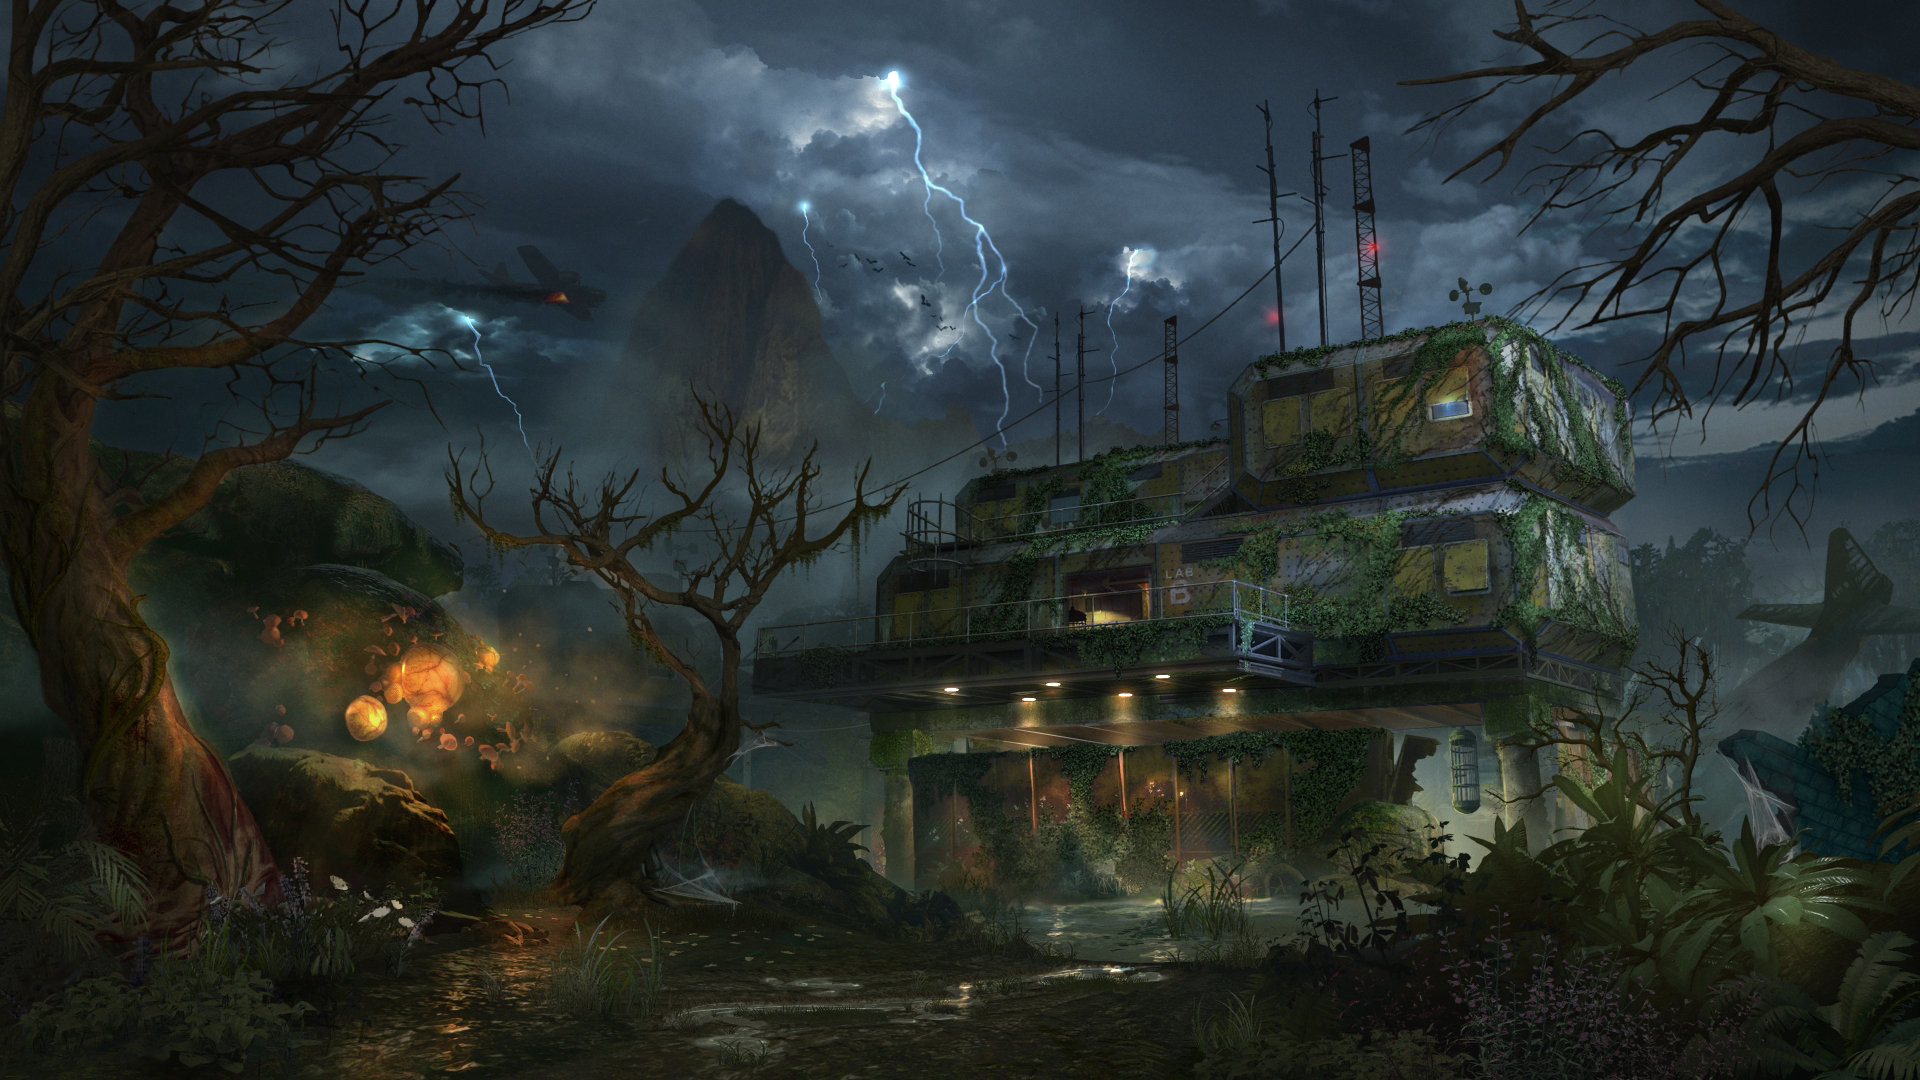 1920x1080 More wallpaper collections. 65 Wallpapers. black ops 3 zombies wallpaper